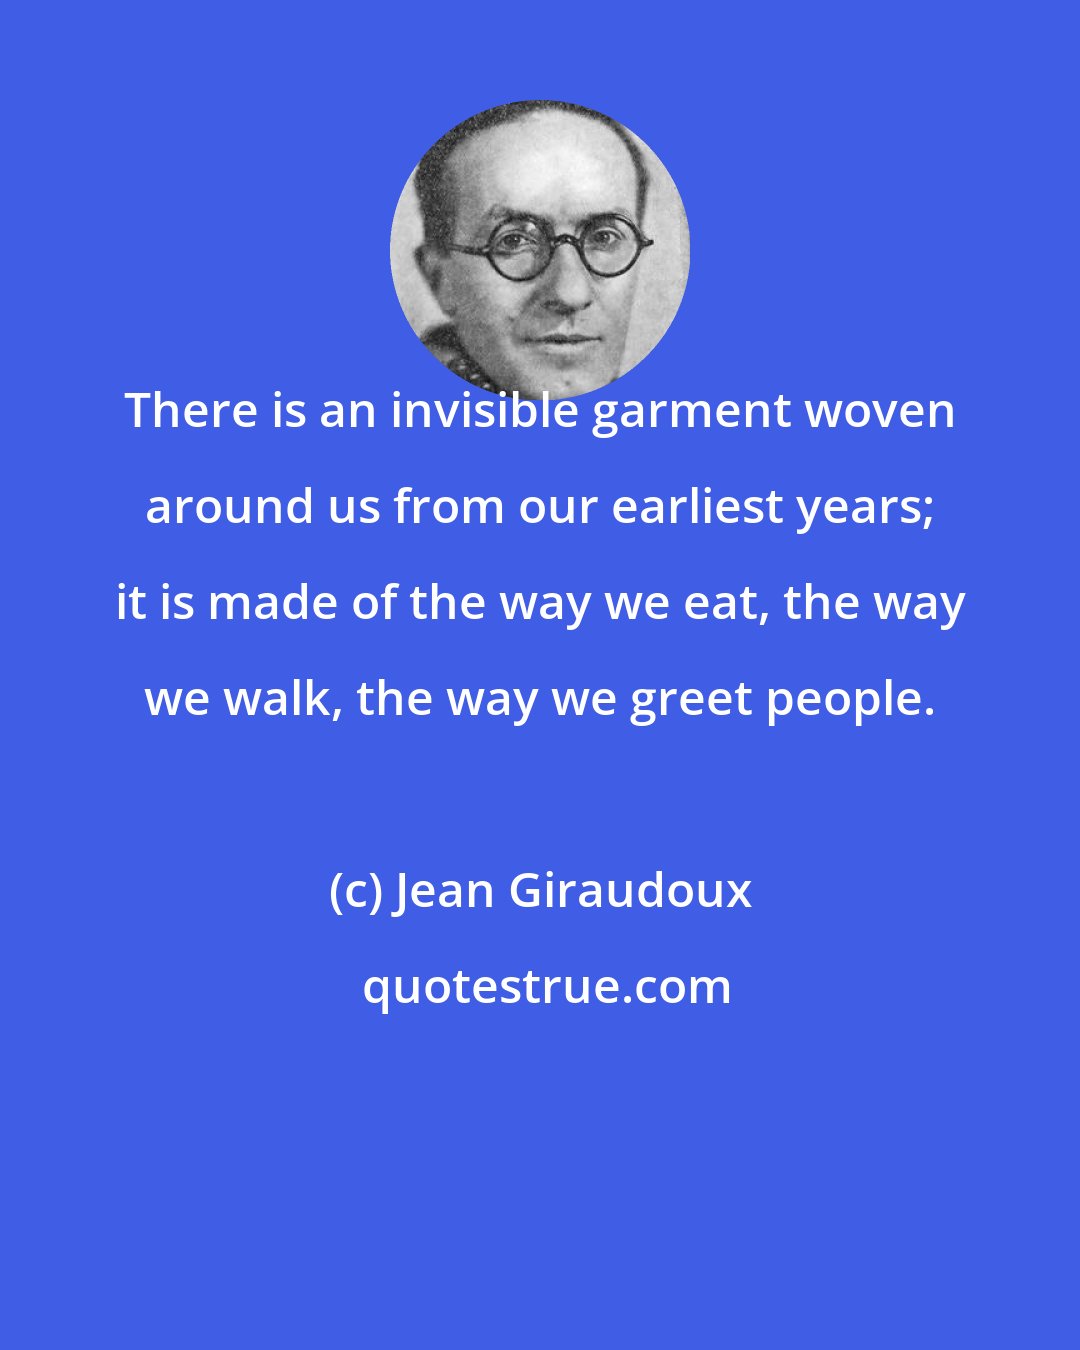 Jean Giraudoux: There is an invisible garment woven around us from our earliest years; it is made of the way we eat, the way we walk, the way we greet people.